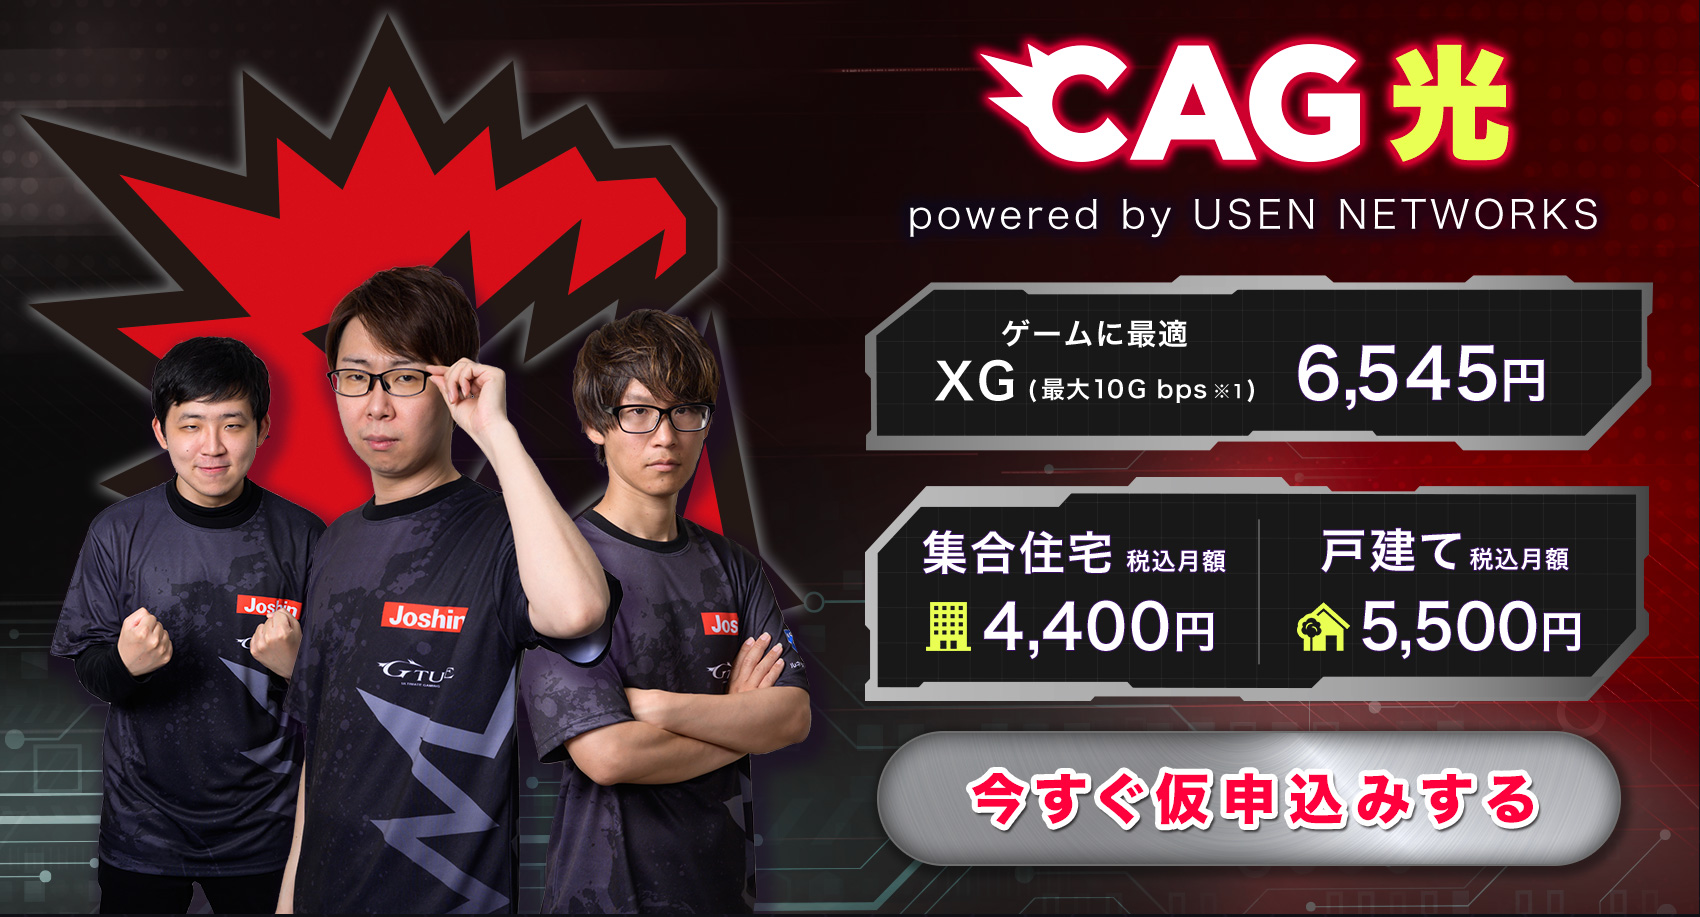 CAG光 powered by USEN NETWORKS 特典